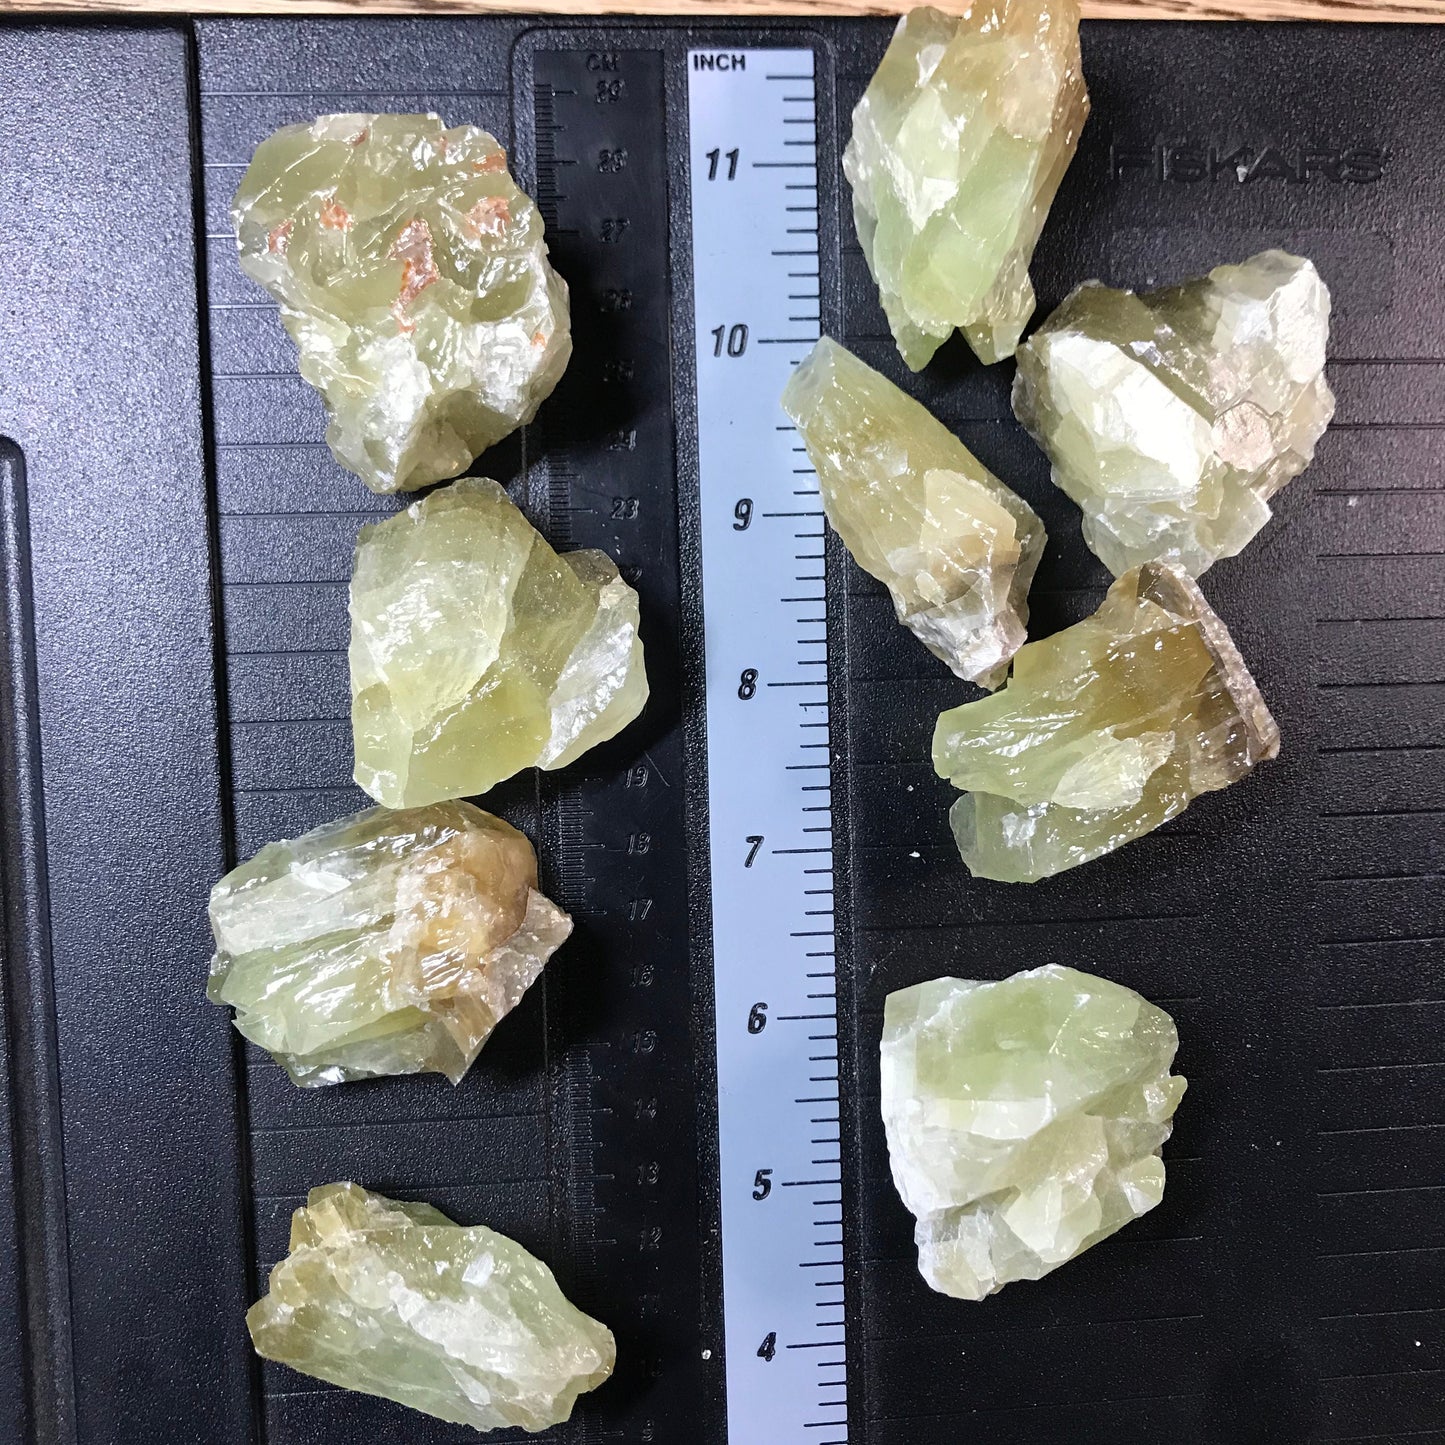 Green Calcite, One stone (Approx 2" -3"), Rough Green Healing Crystal, Energy Cleanser, Heart Chakra 1303